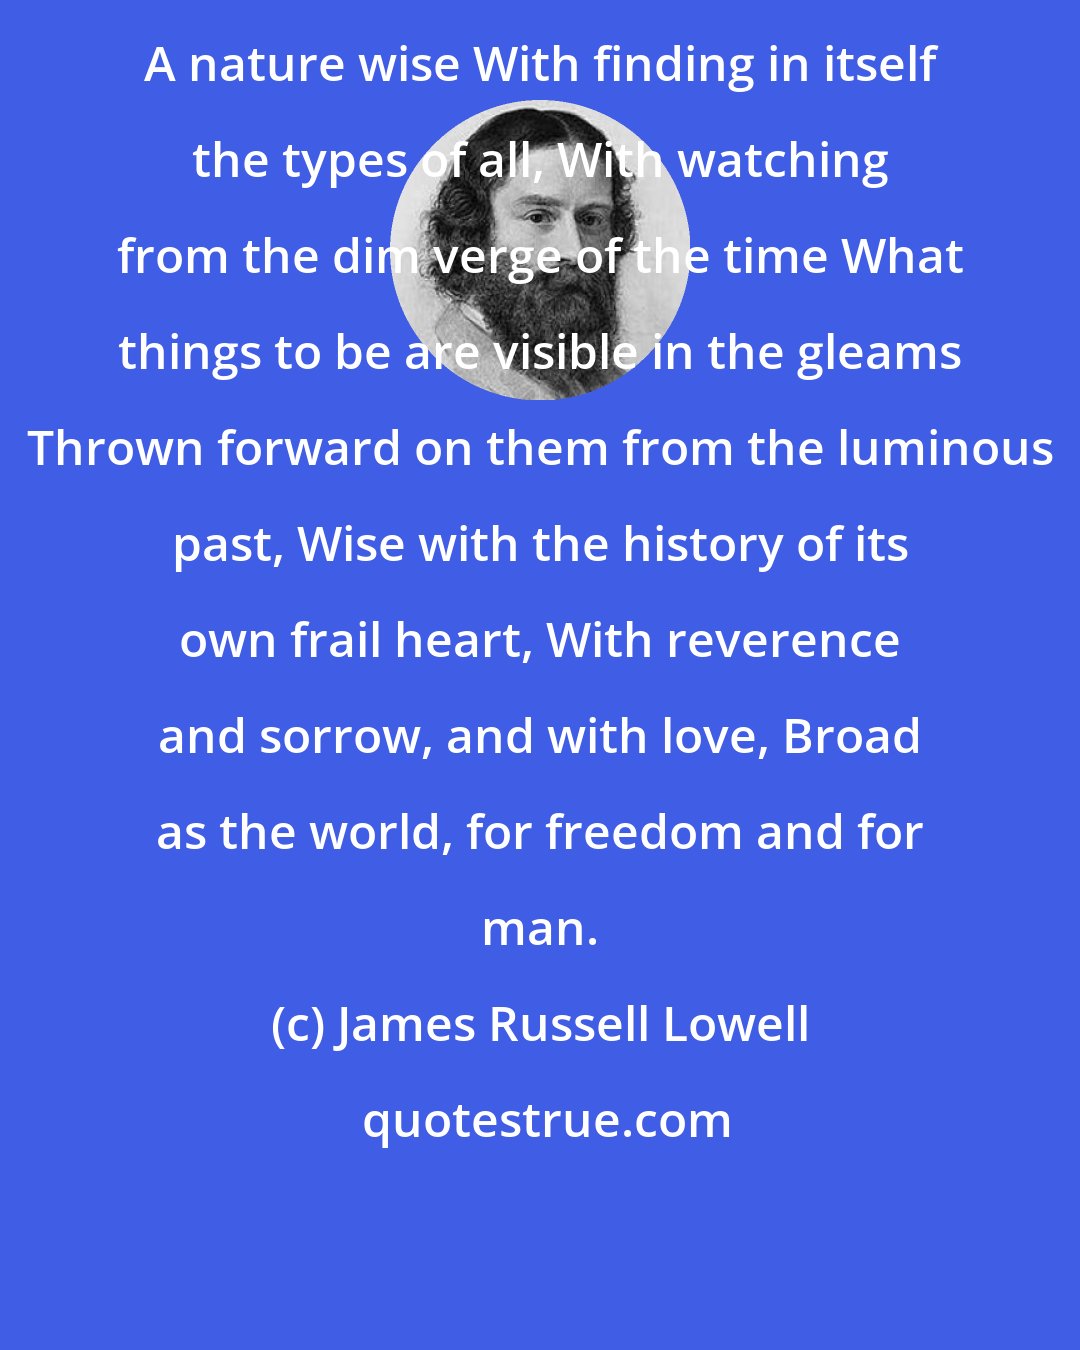 James Russell Lowell: A nature wise With finding in itself the types of all, With watching from the dim verge of the time What things to be are visible in the gleams Thrown forward on them from the luminous past, Wise with the history of its own frail heart, With reverence and sorrow, and with love, Broad as the world, for freedom and for man.